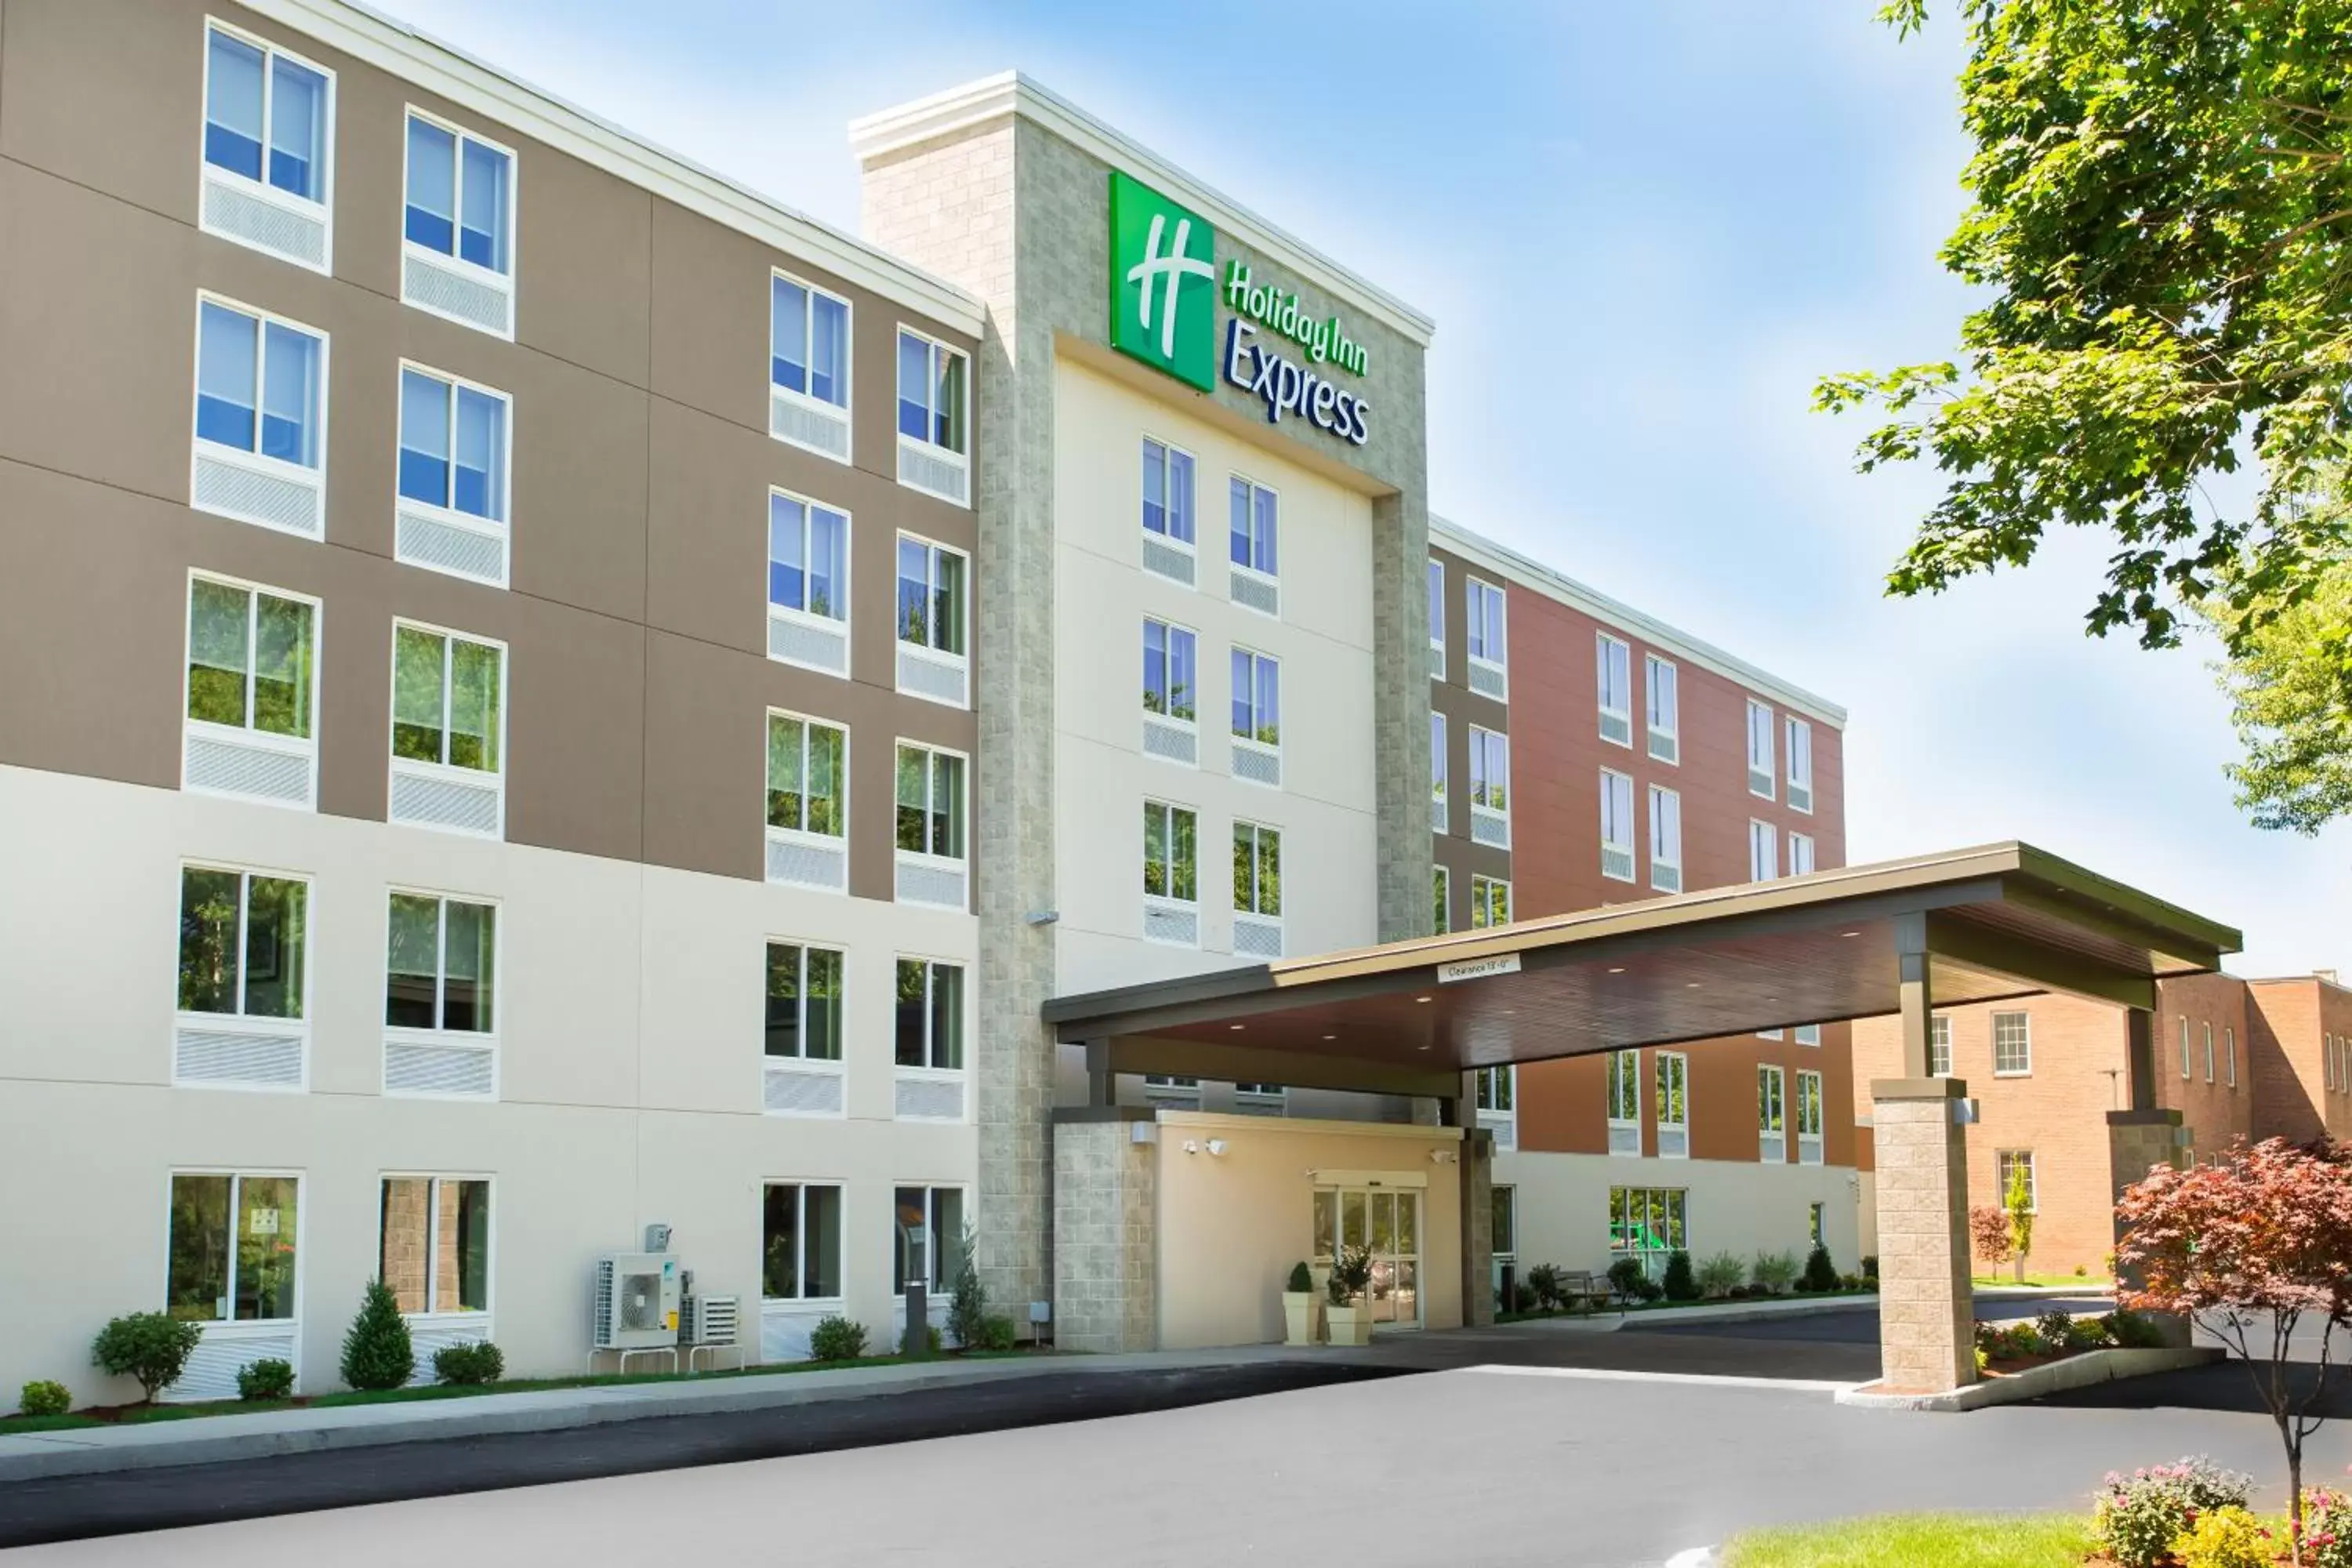 Property building in Holiday Inn Express Chelmsford, an IHG Hotel